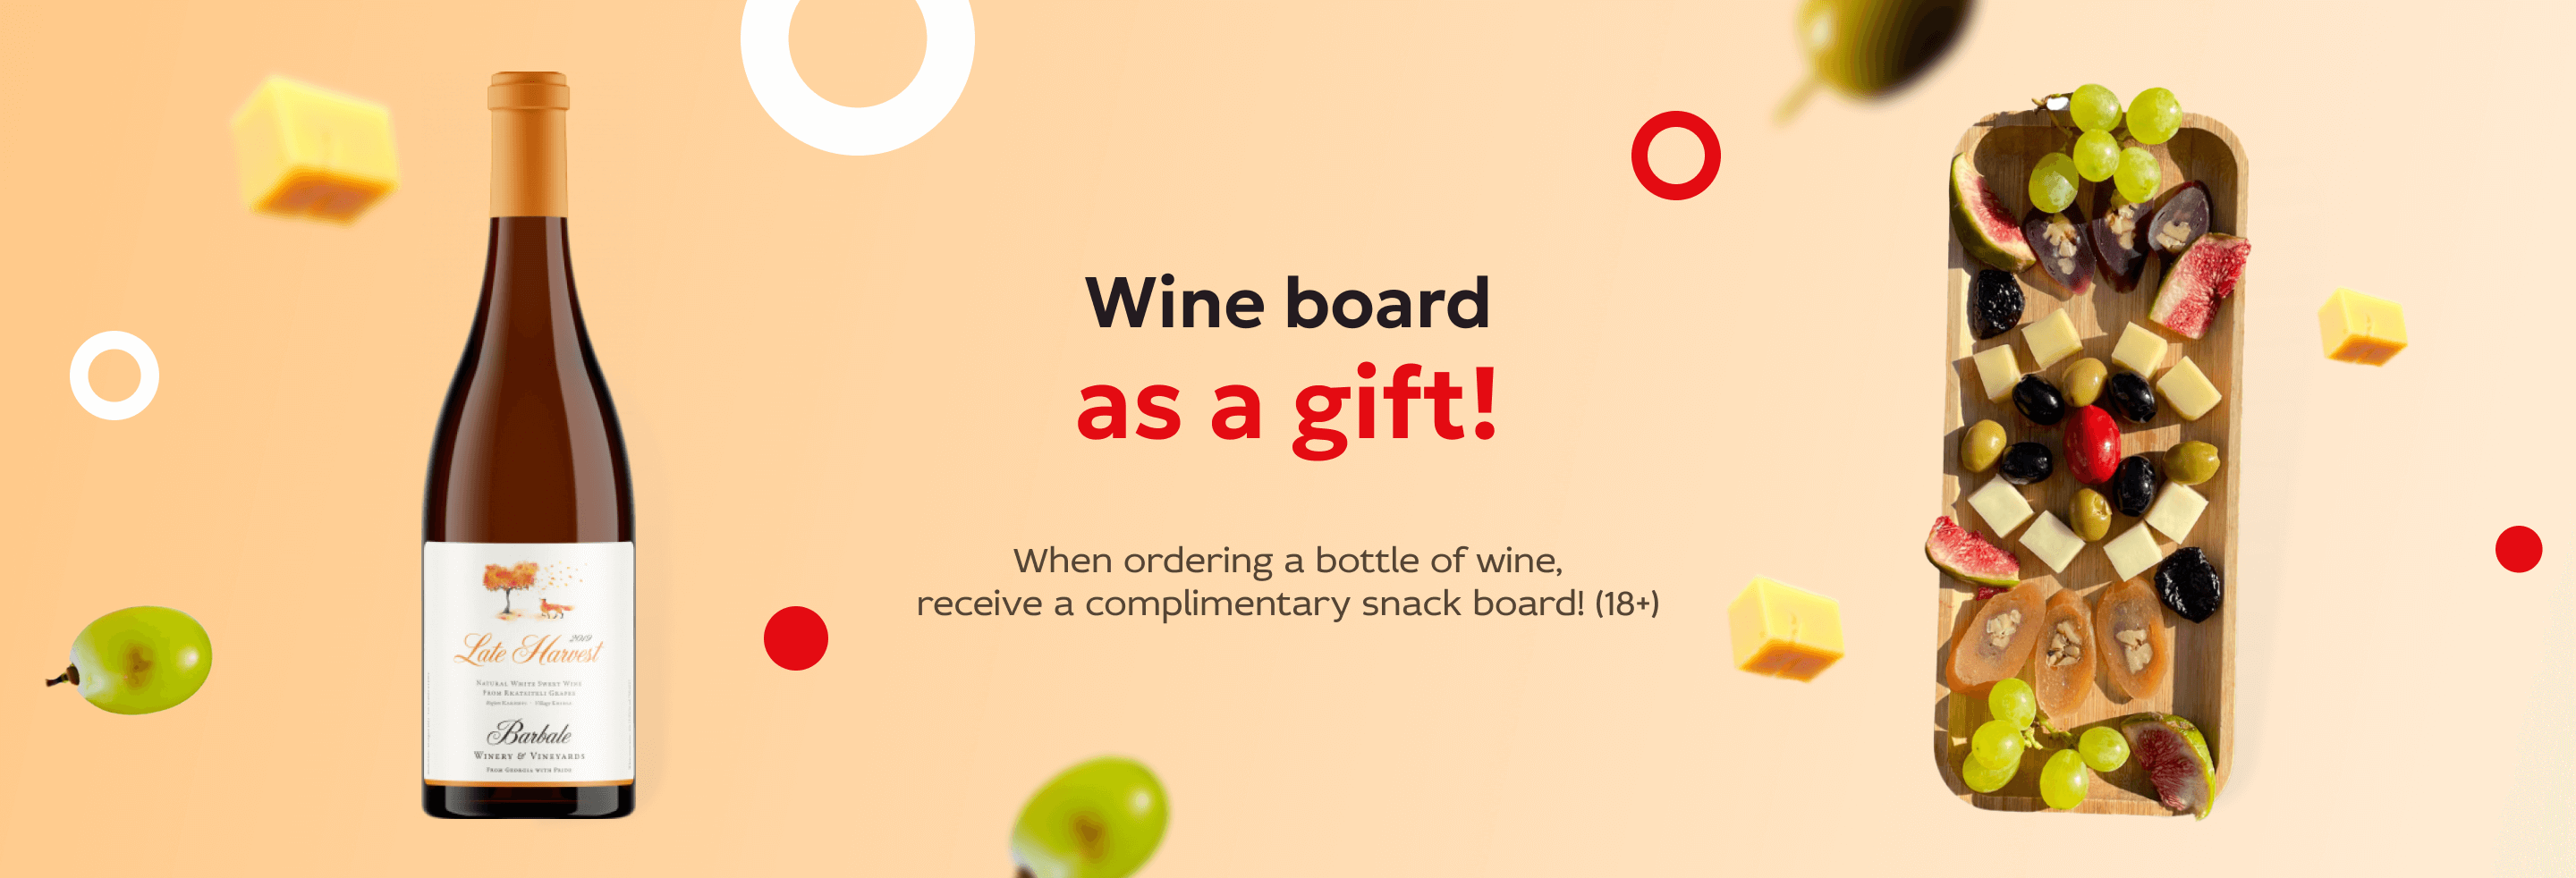 Wine board as a gift!